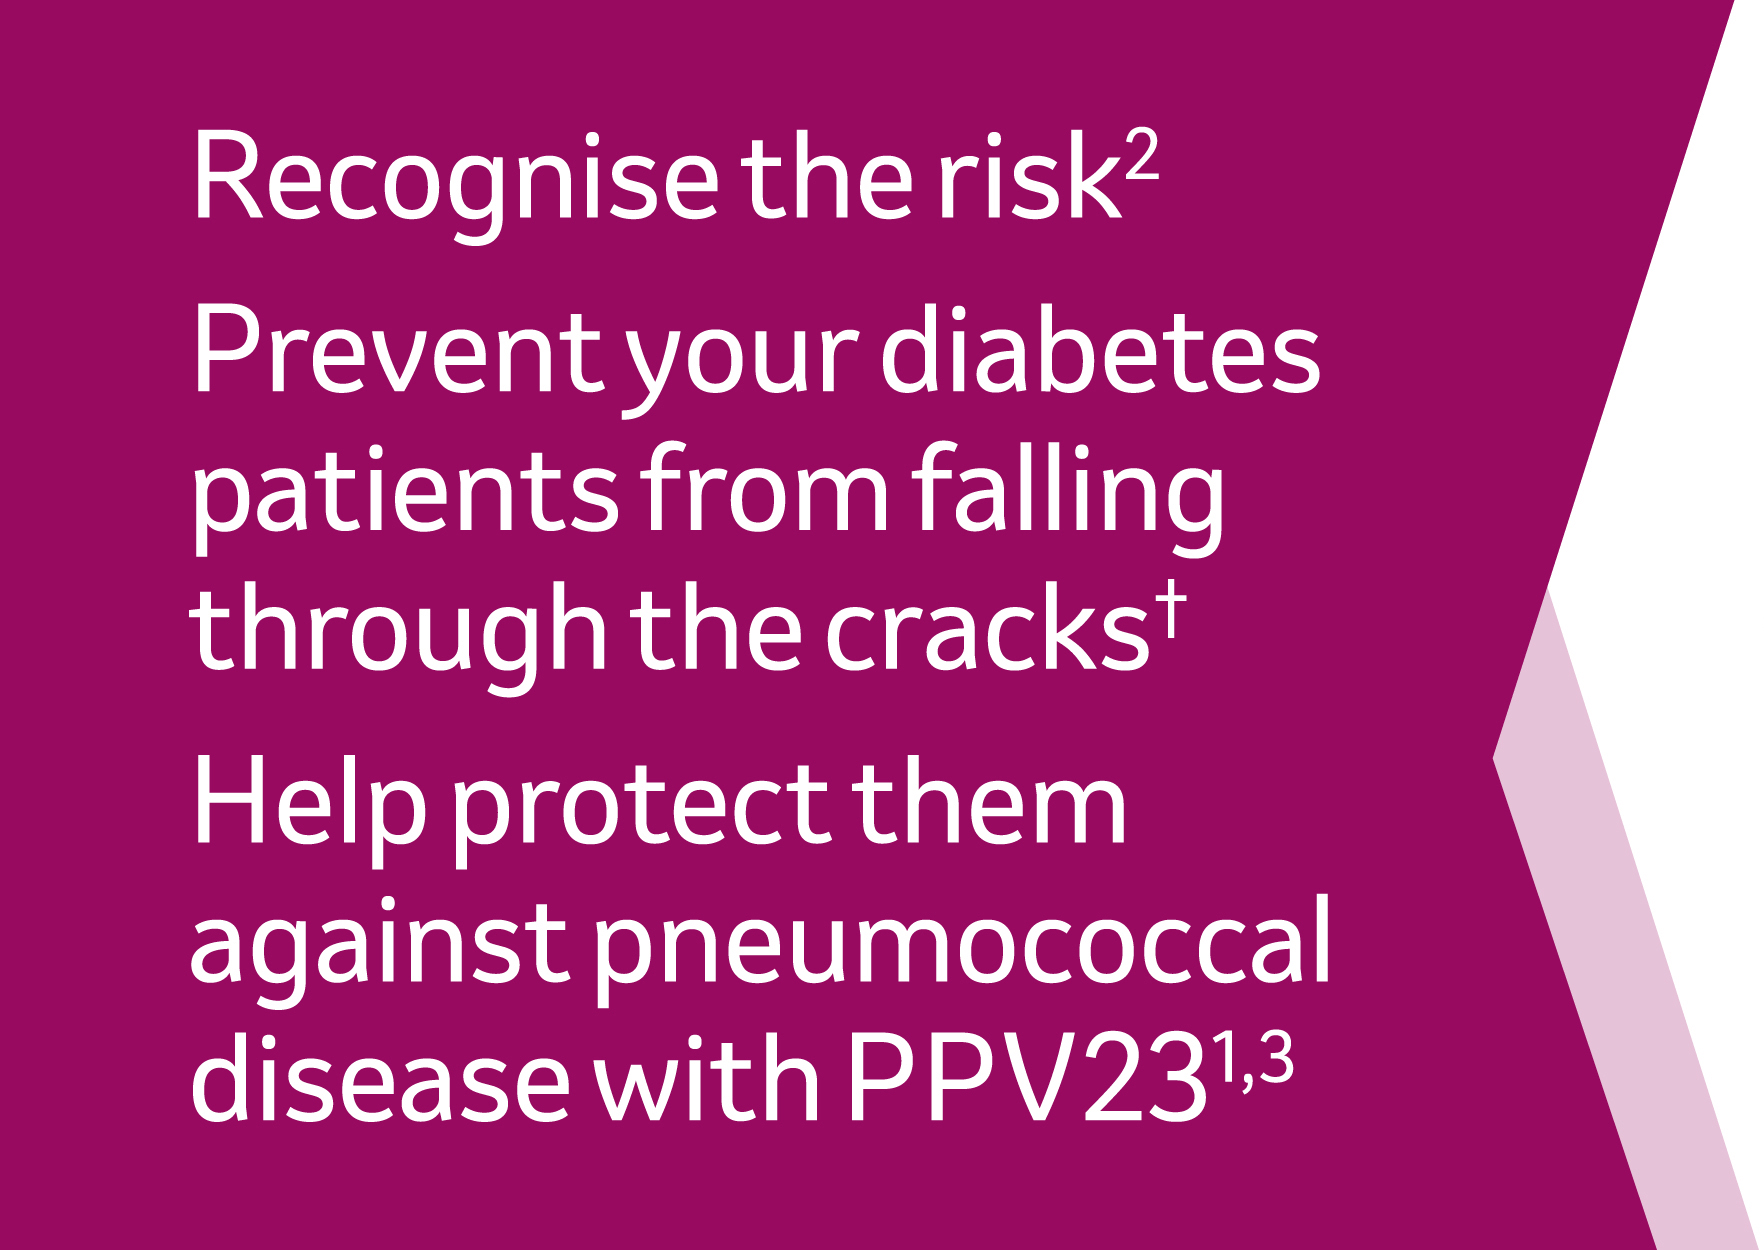 Recognise the risk (reference 2), prevent your diabetes patients from falling through the cracks*, help protect them against pneumococcal disease with pPV23 - references 1,3